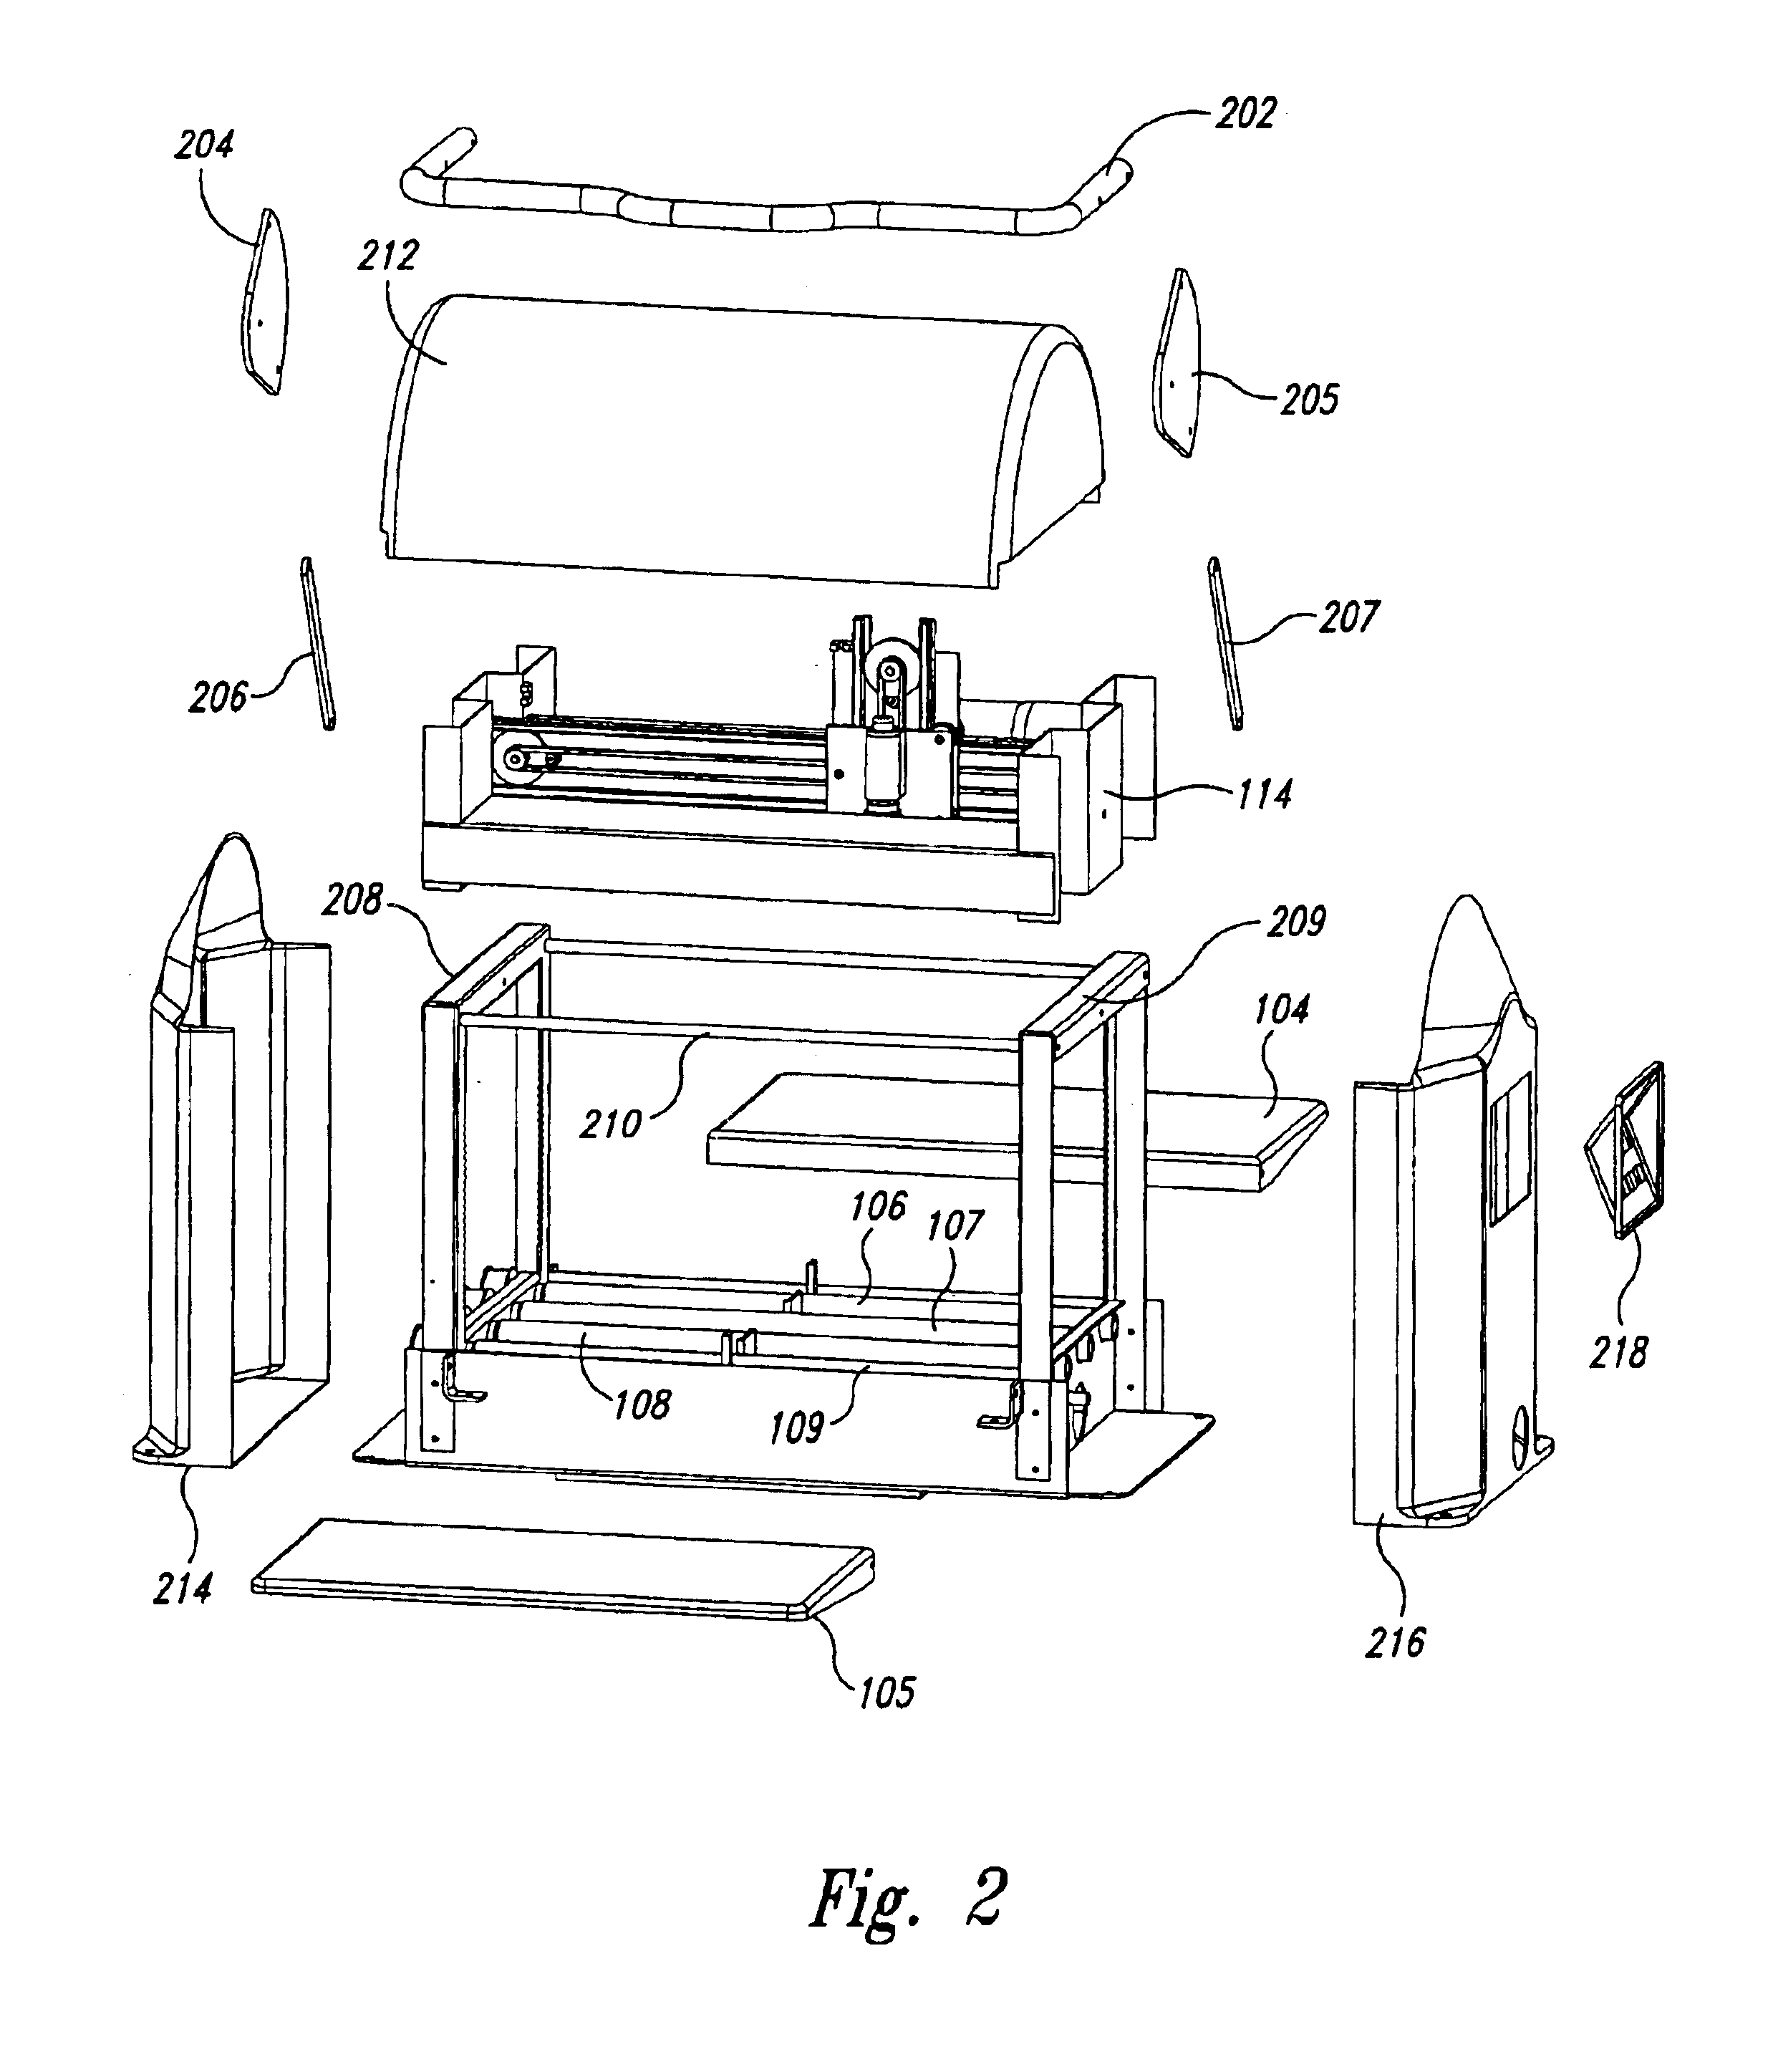 Processor-controlled carving and multi-purpose shaping device